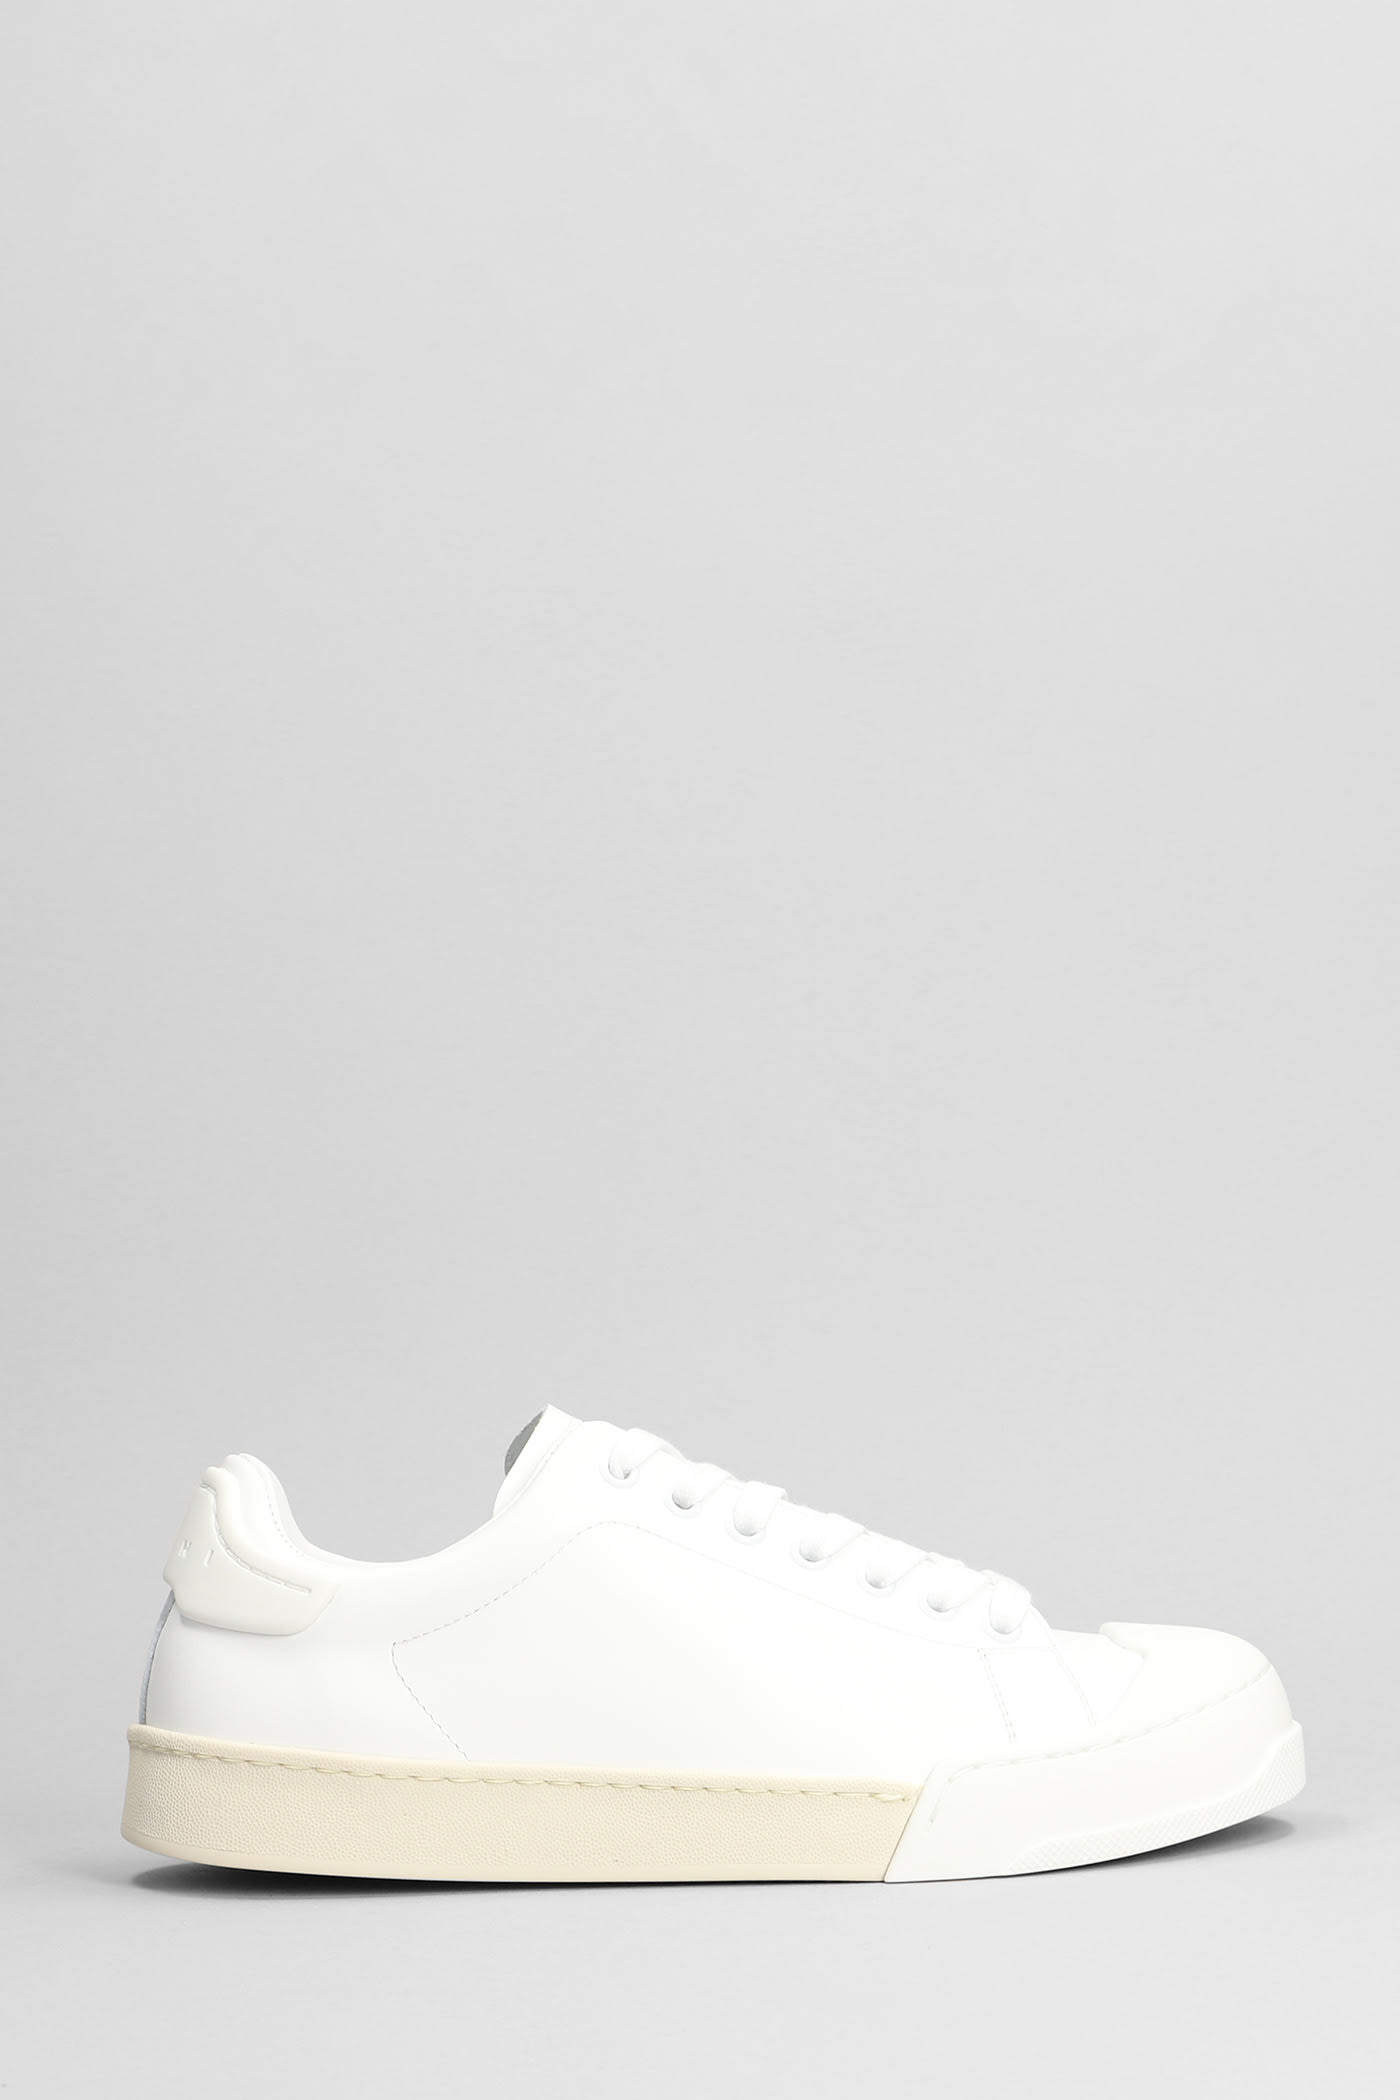 MARNI SNEAKERS IN WHITE LEATHER